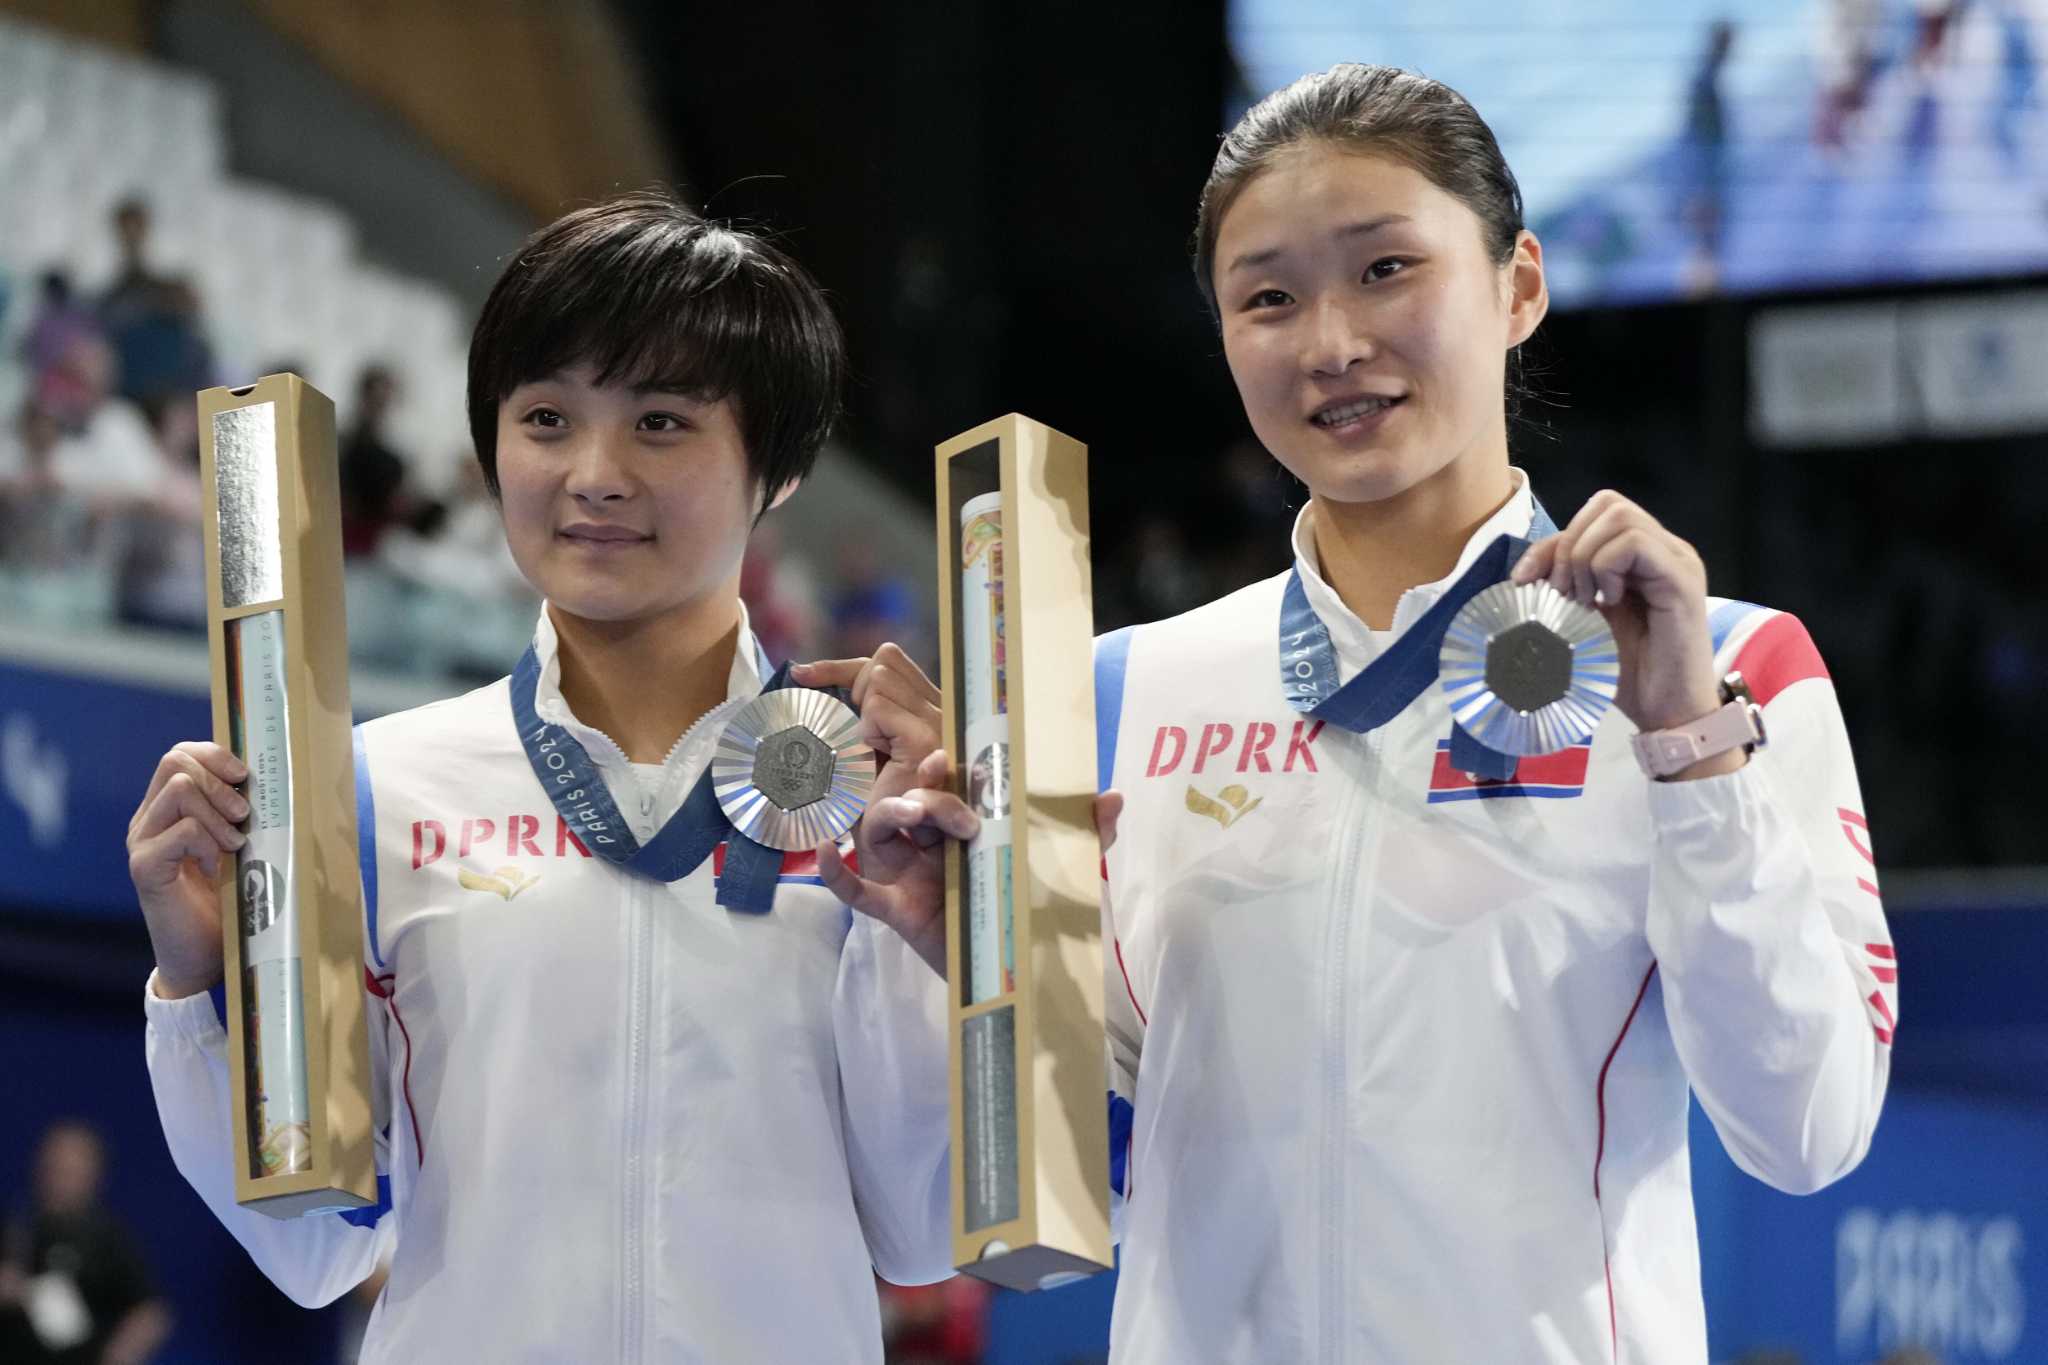 North Korea wins first diving medal ever, as China continues dominance with another gold